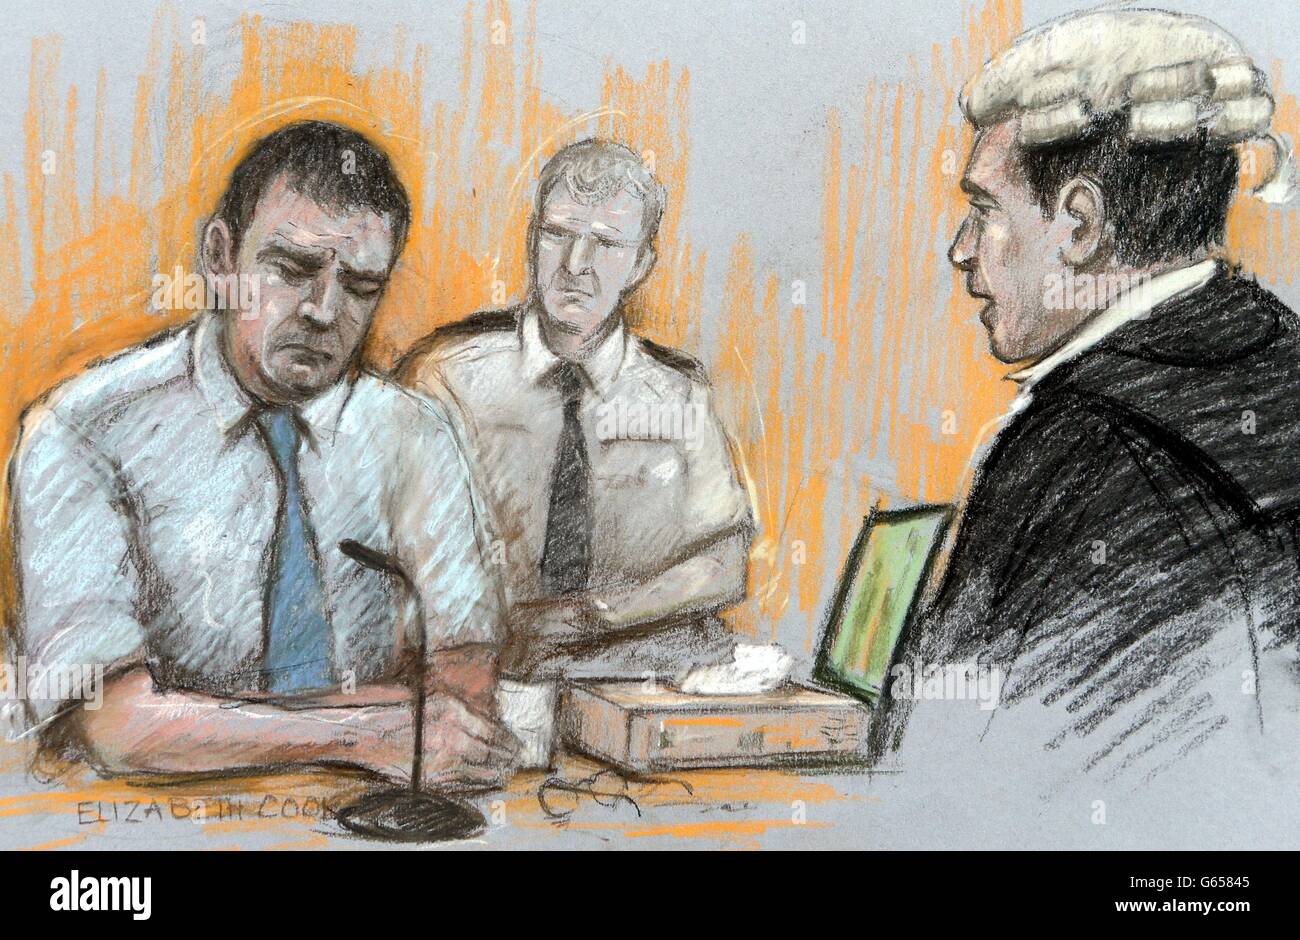 Courts artist impression by Elizabeth Cook of Mark Bridger, 47, of Ceinws, mid-Wales and Defence QC Brendan Kelly during his testimony at Mold Crown Court, where the former slaughterhouse worker is accused of abducting and murdering schoolgirl April Jones in a 'sexually motivated' attack. Stock Photo